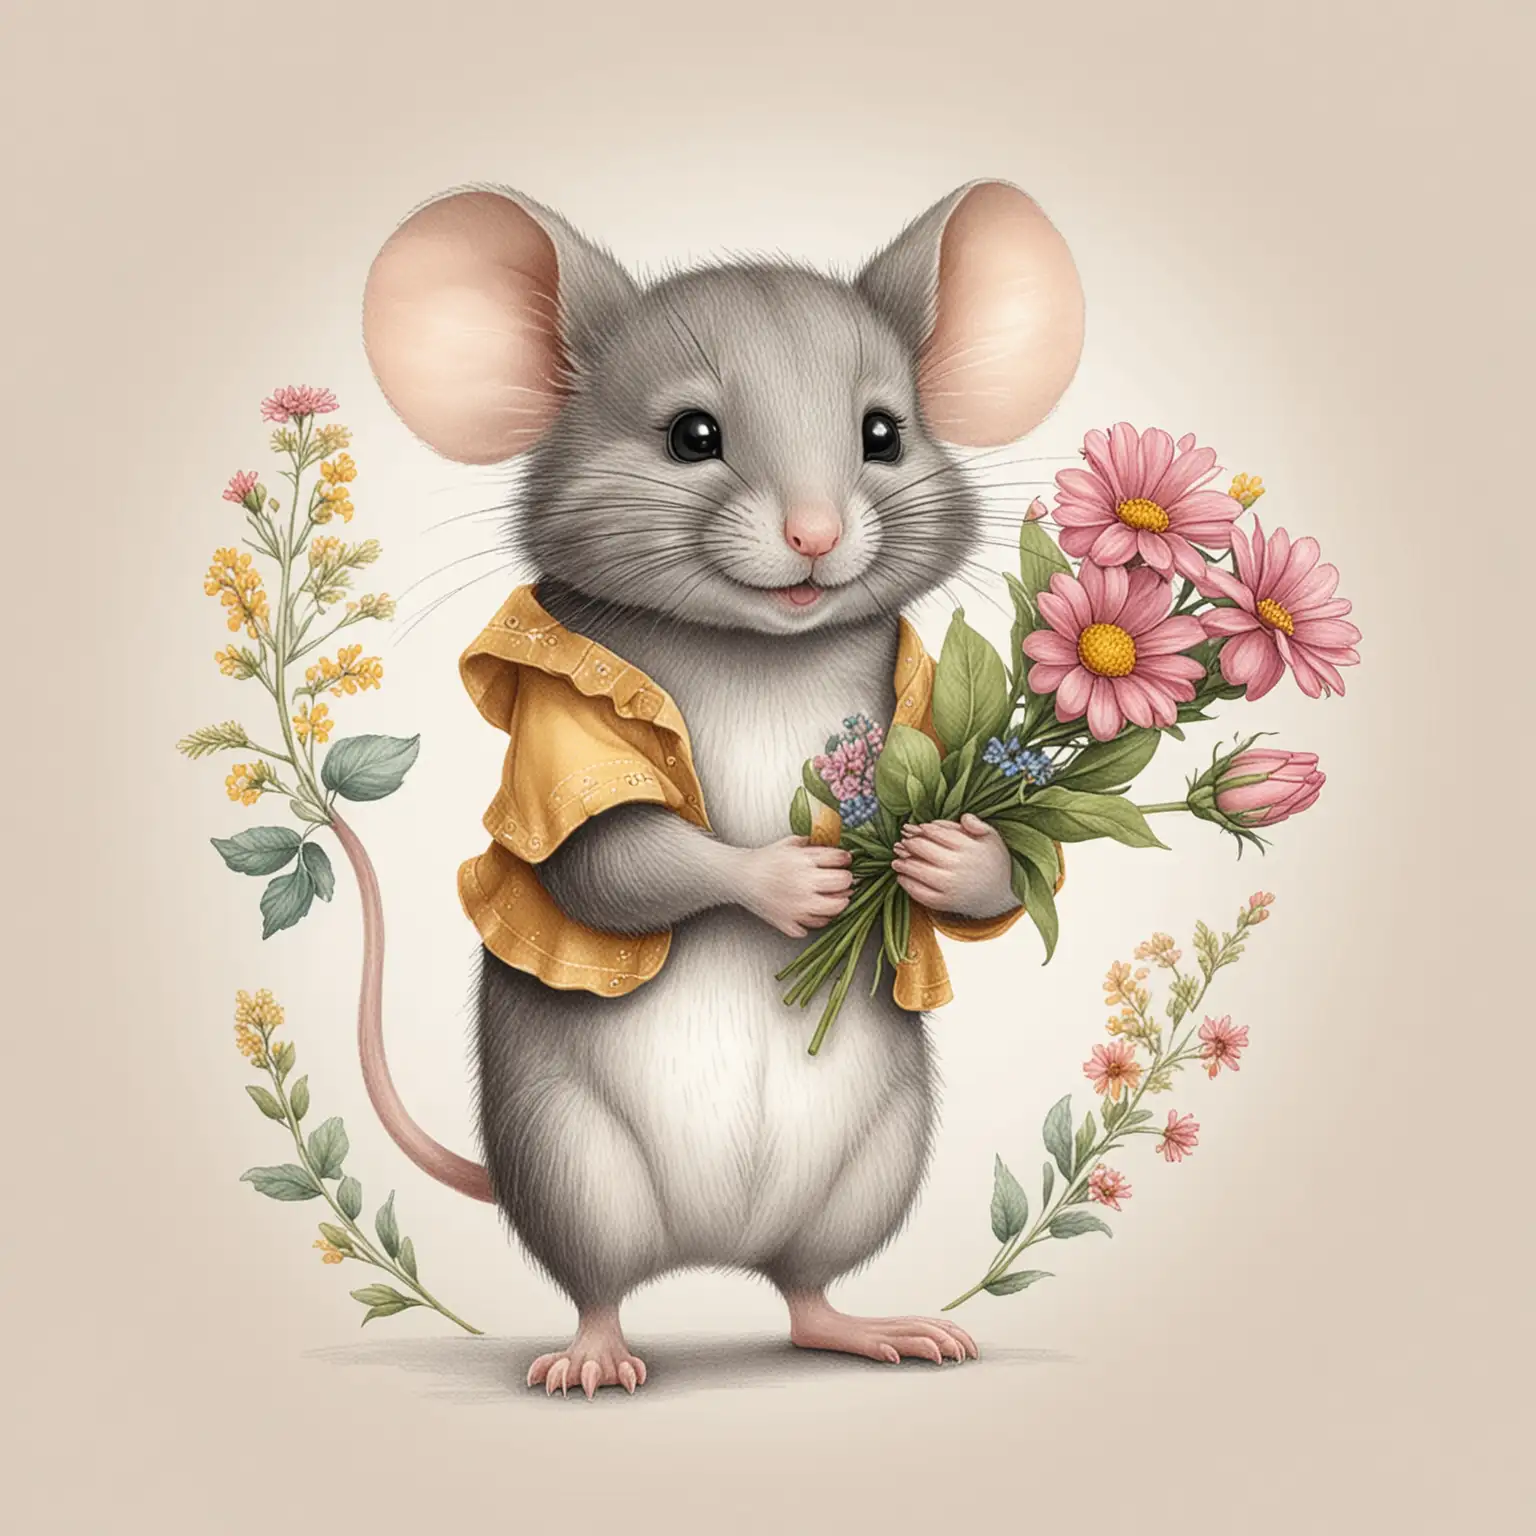 Cute pencil drawing of a mouse holding flowers, isolated on a white background, suitable for clip art